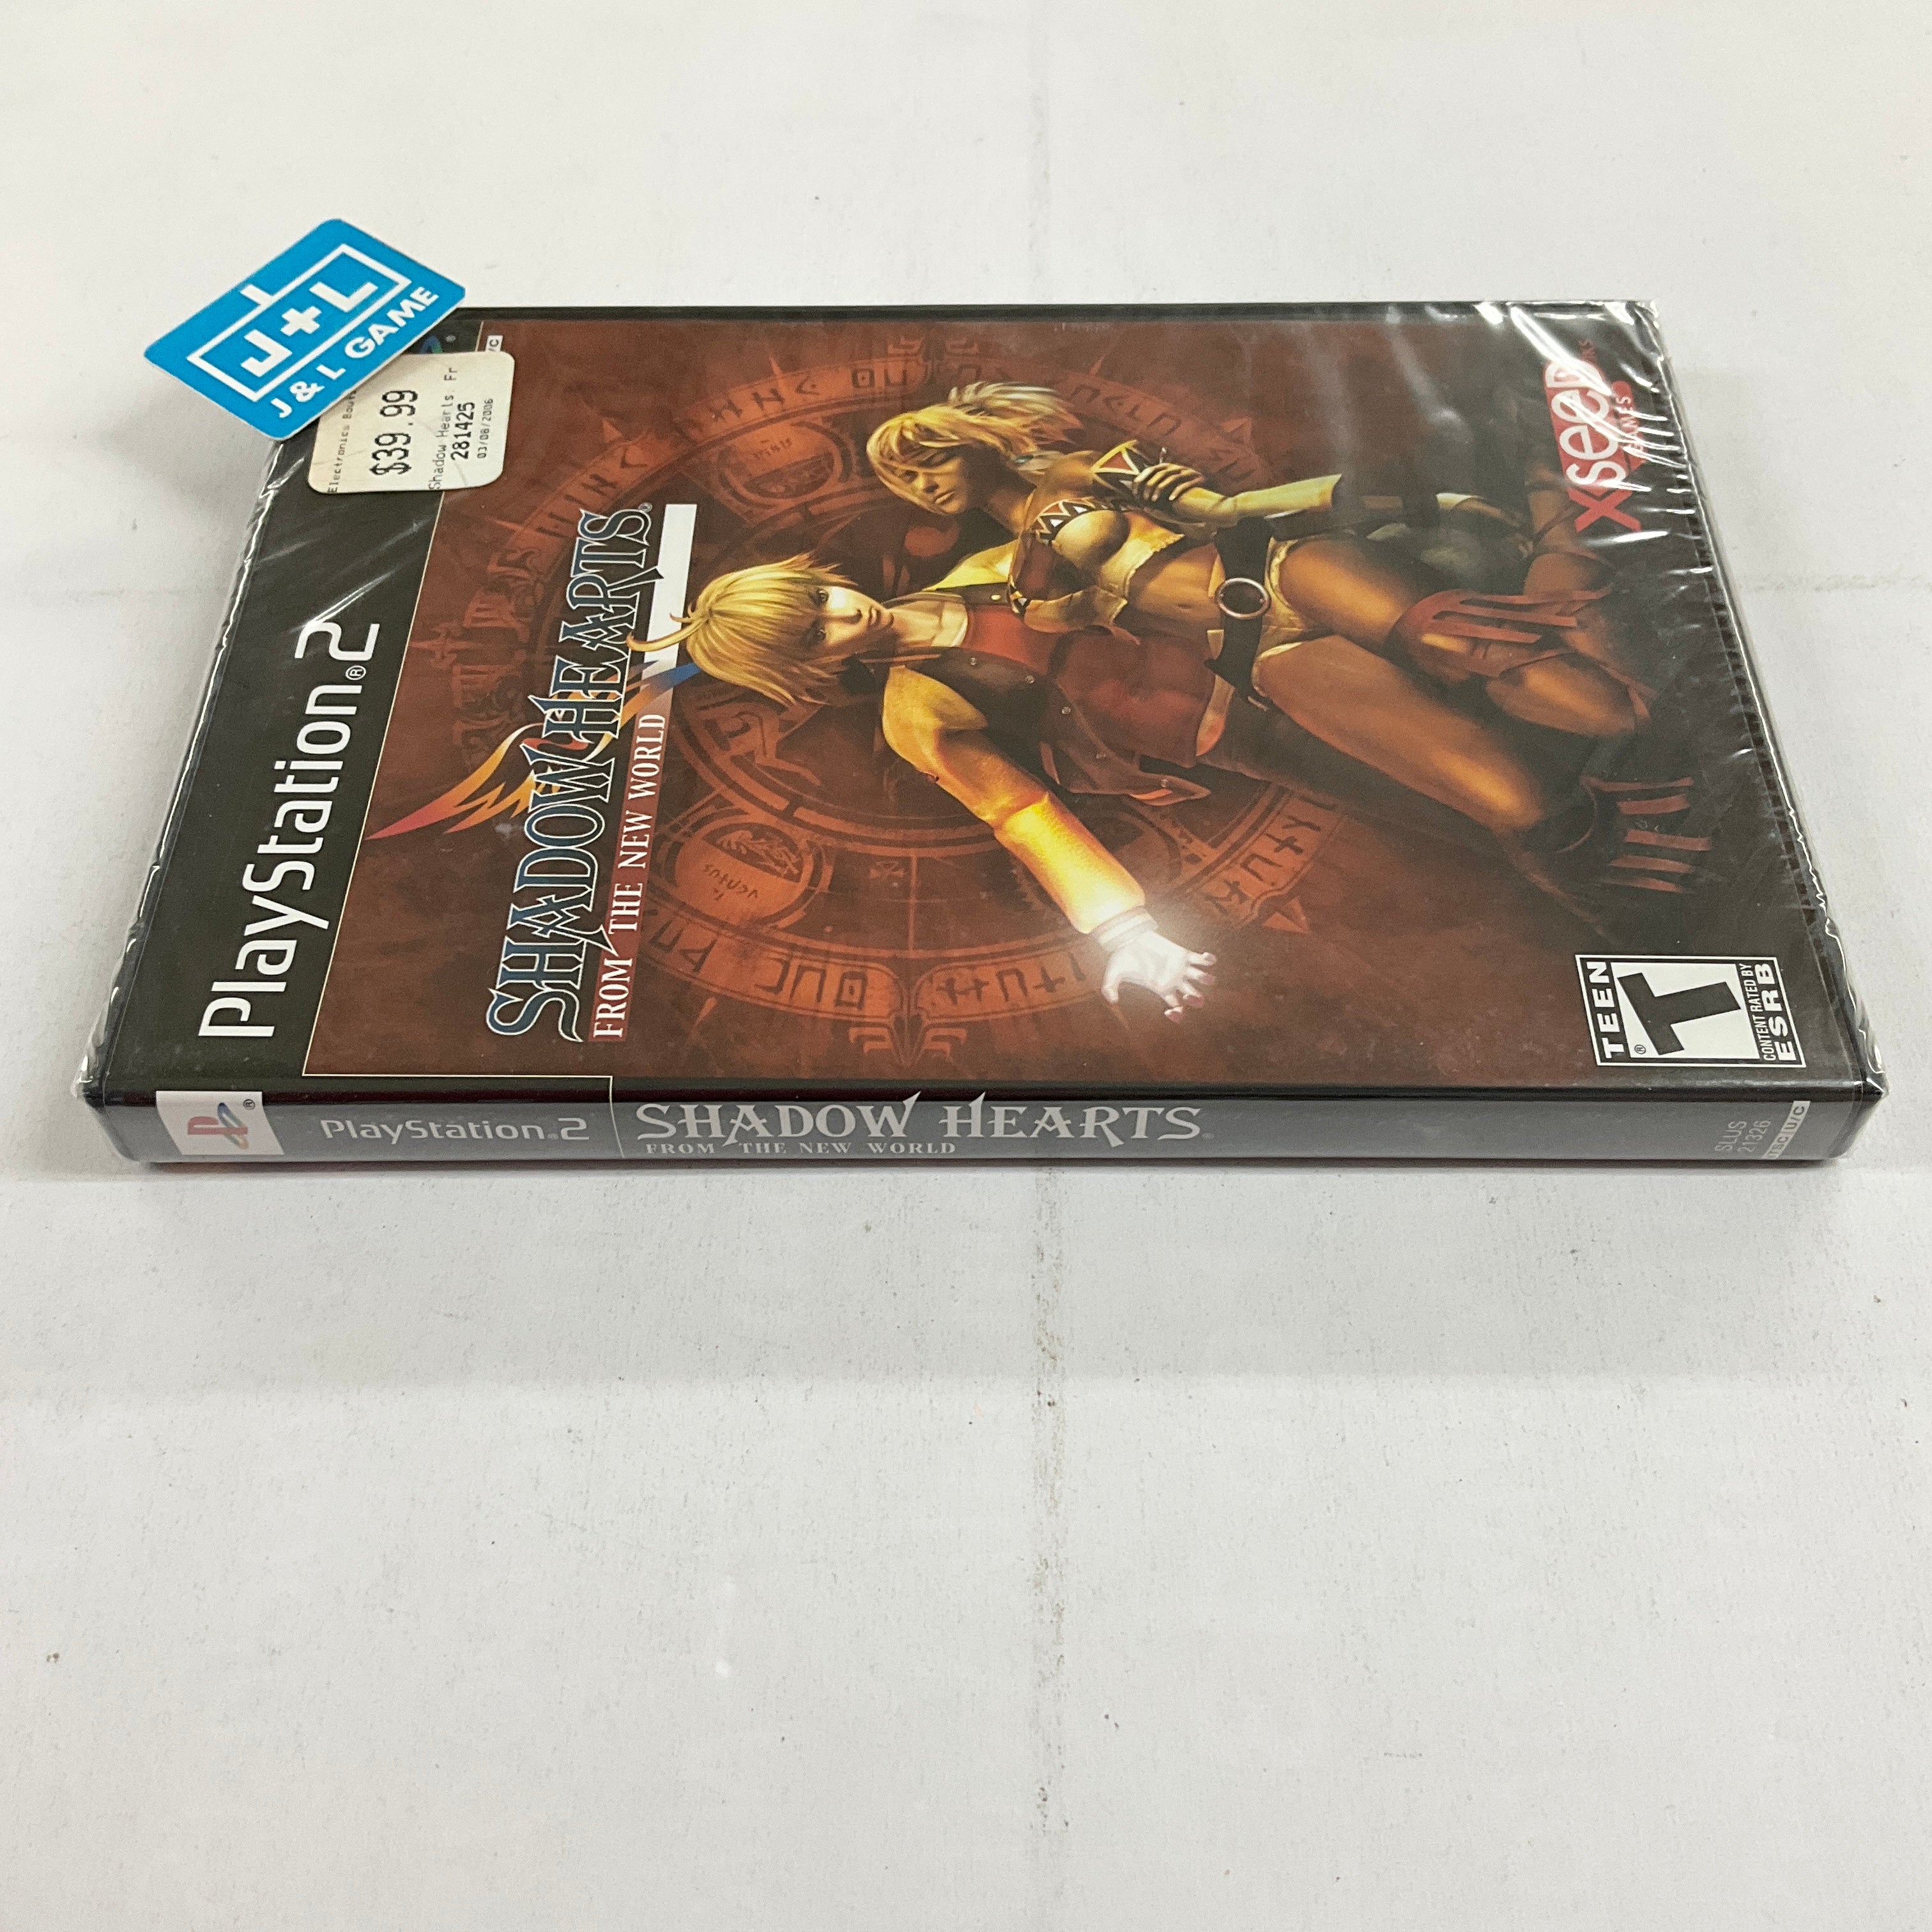 Shadow Hearts: From the New World - (PS2) PlayStation 2 Video Games XSEED Games   